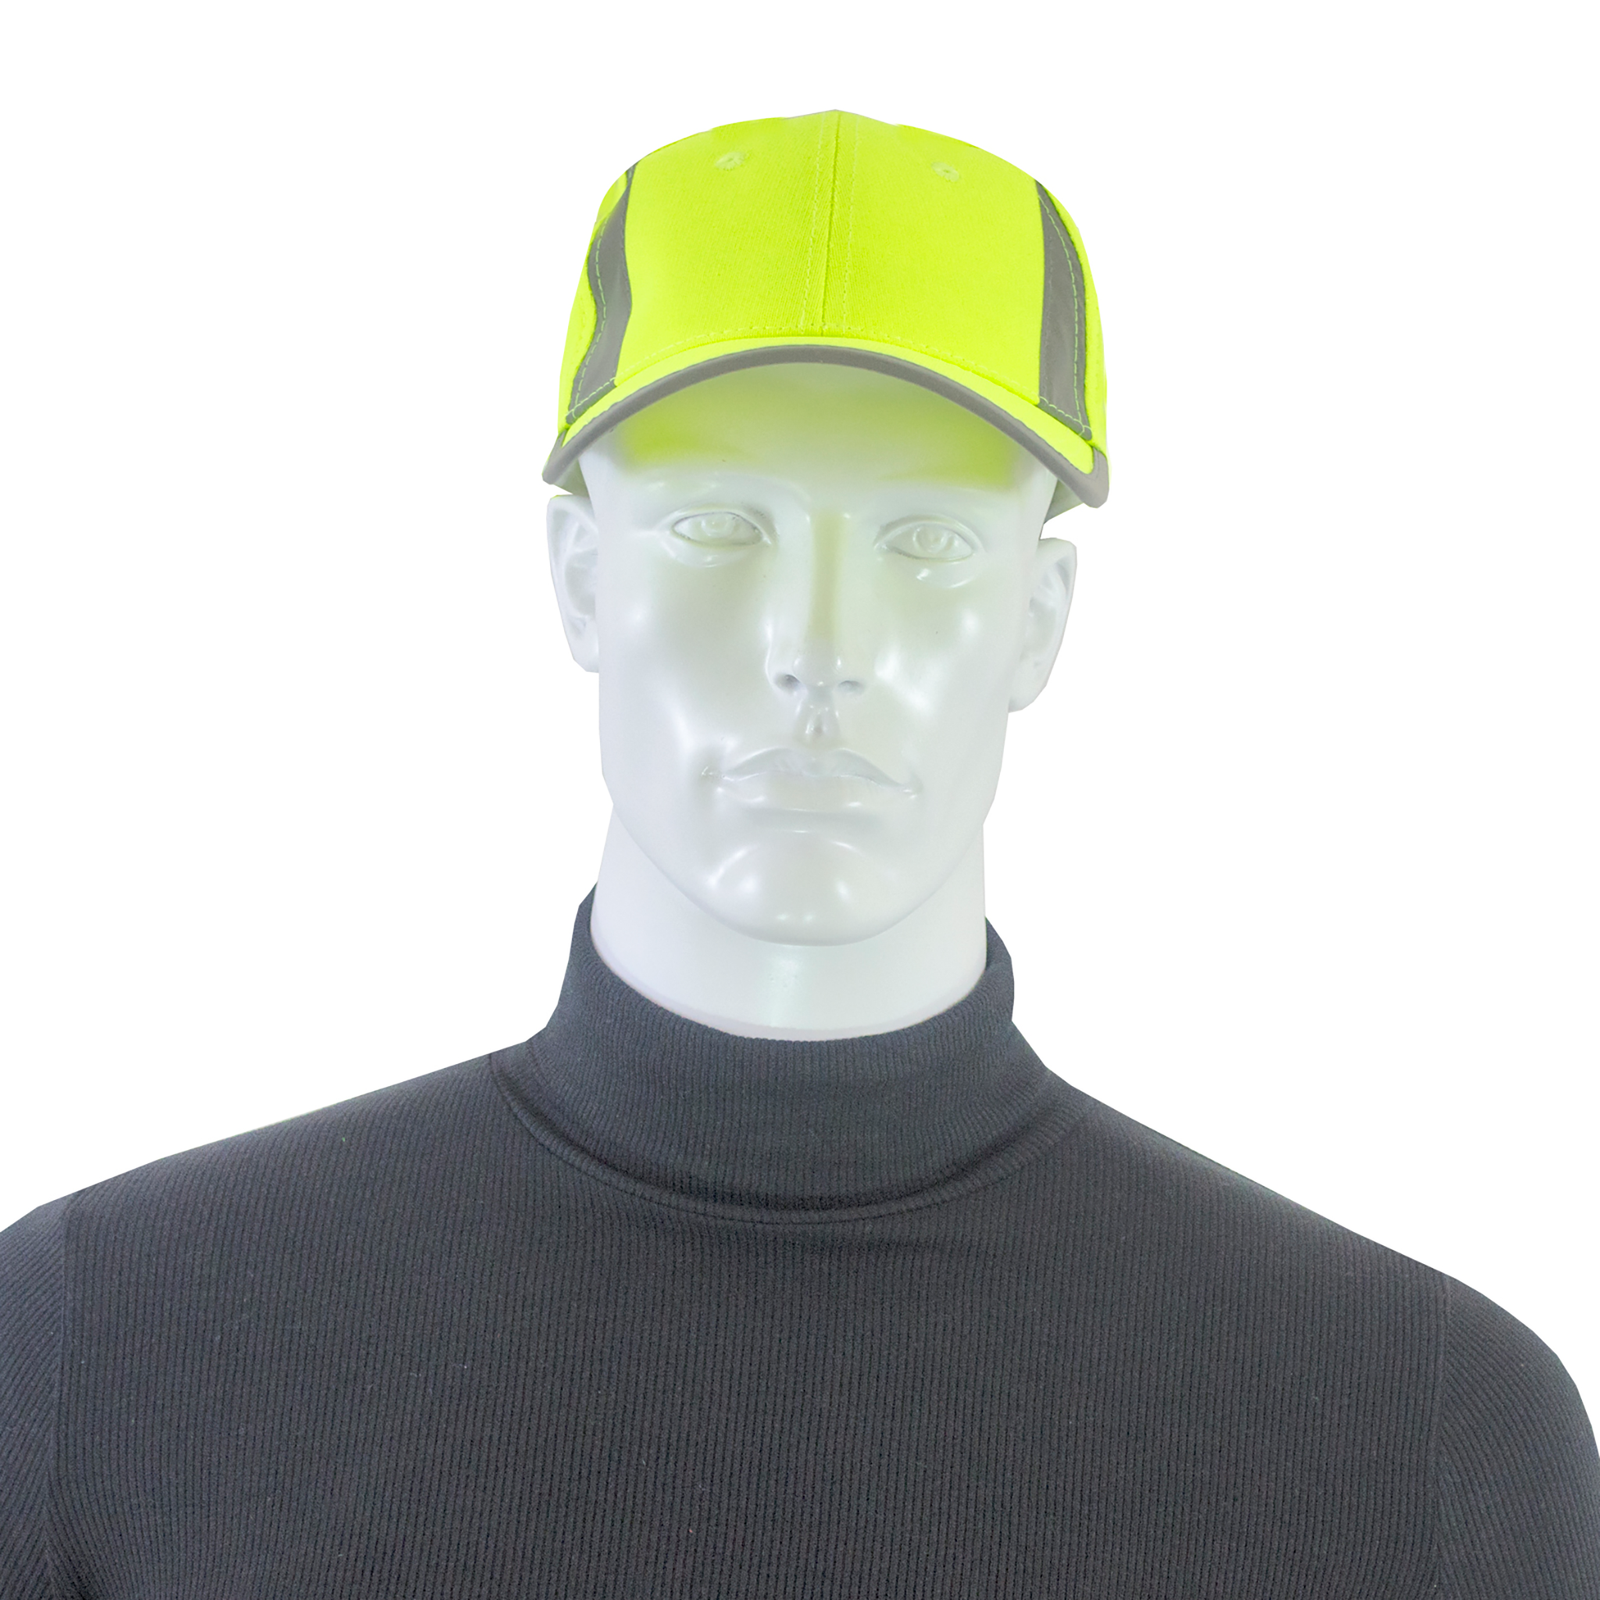 A mannequin wearing a hi-vis lime cap with reflective stripes